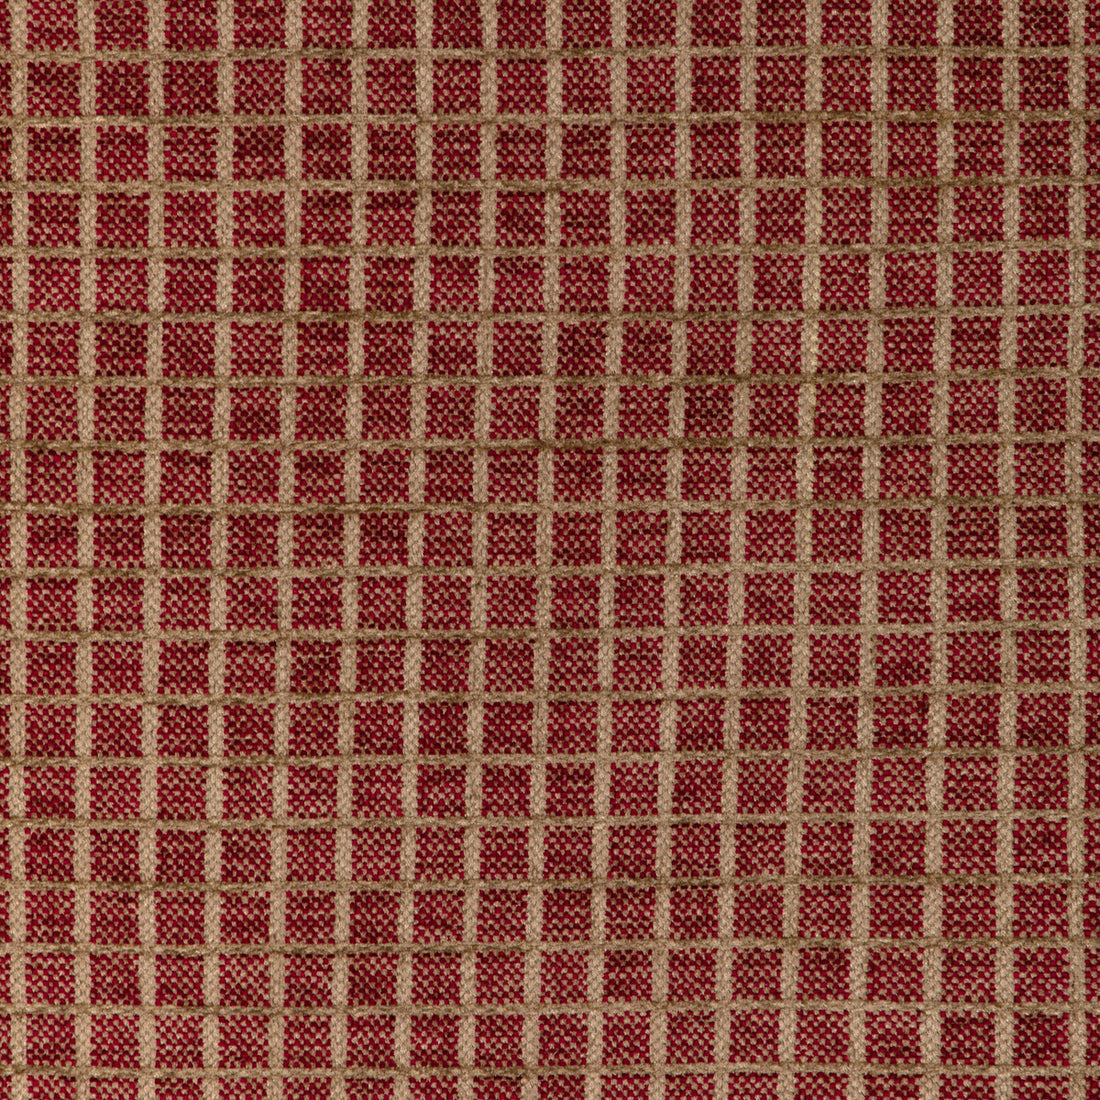 Chiron Texture fabric in red color - pattern 8023155.916.0 - by Brunschwig &amp; Fils in the Chambery Textures IV collection